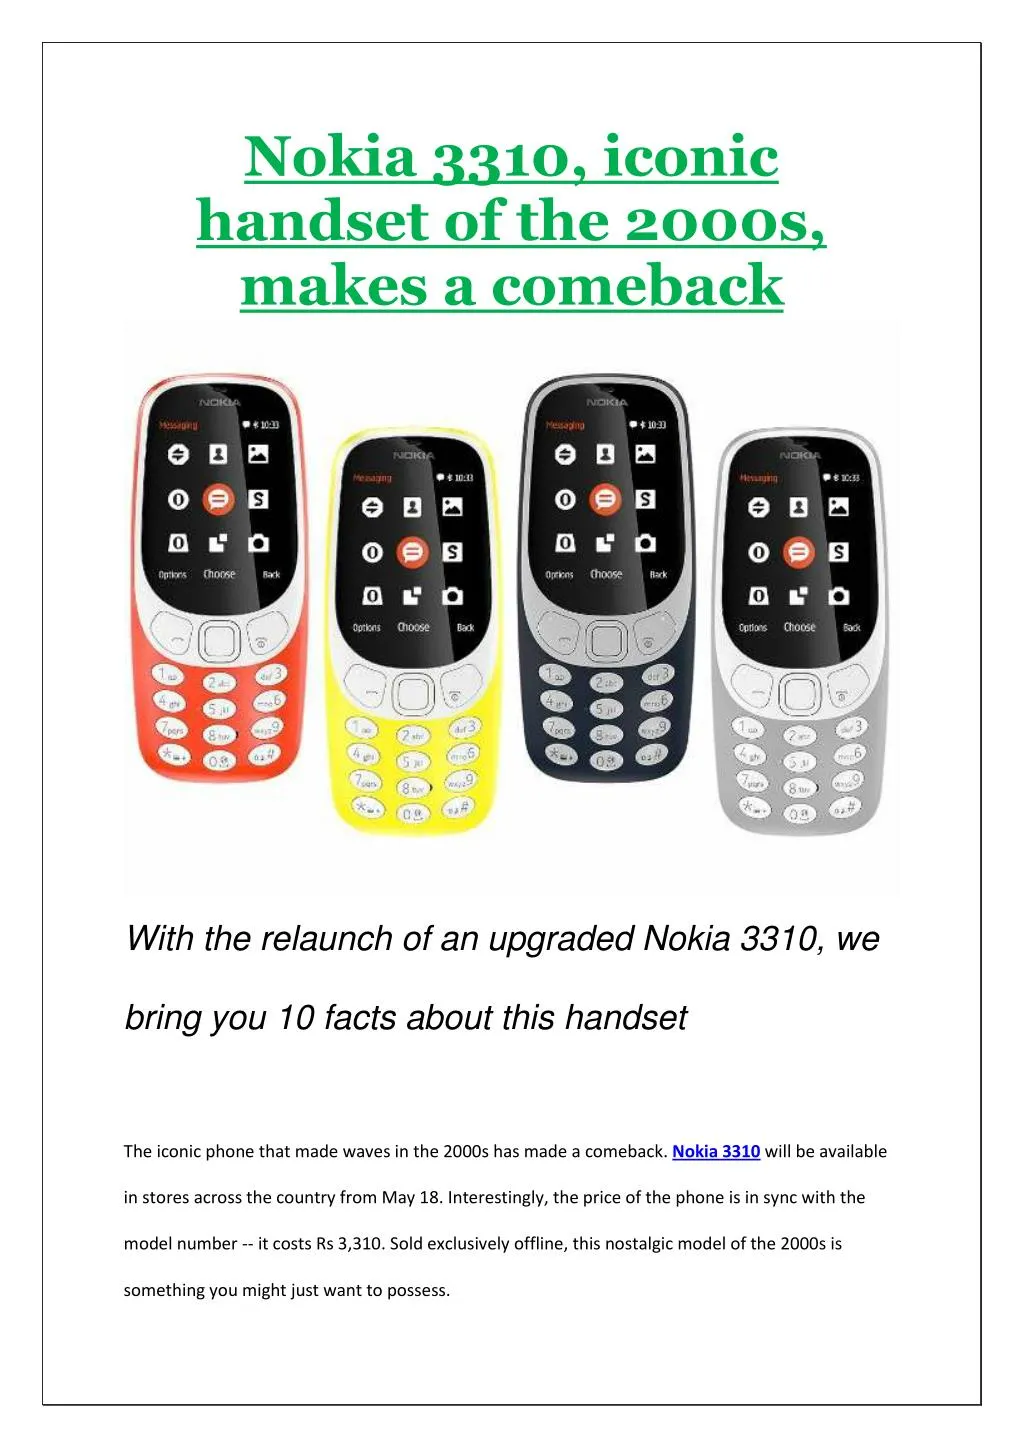 nokia 3310 iconic handset of the 2000s makes